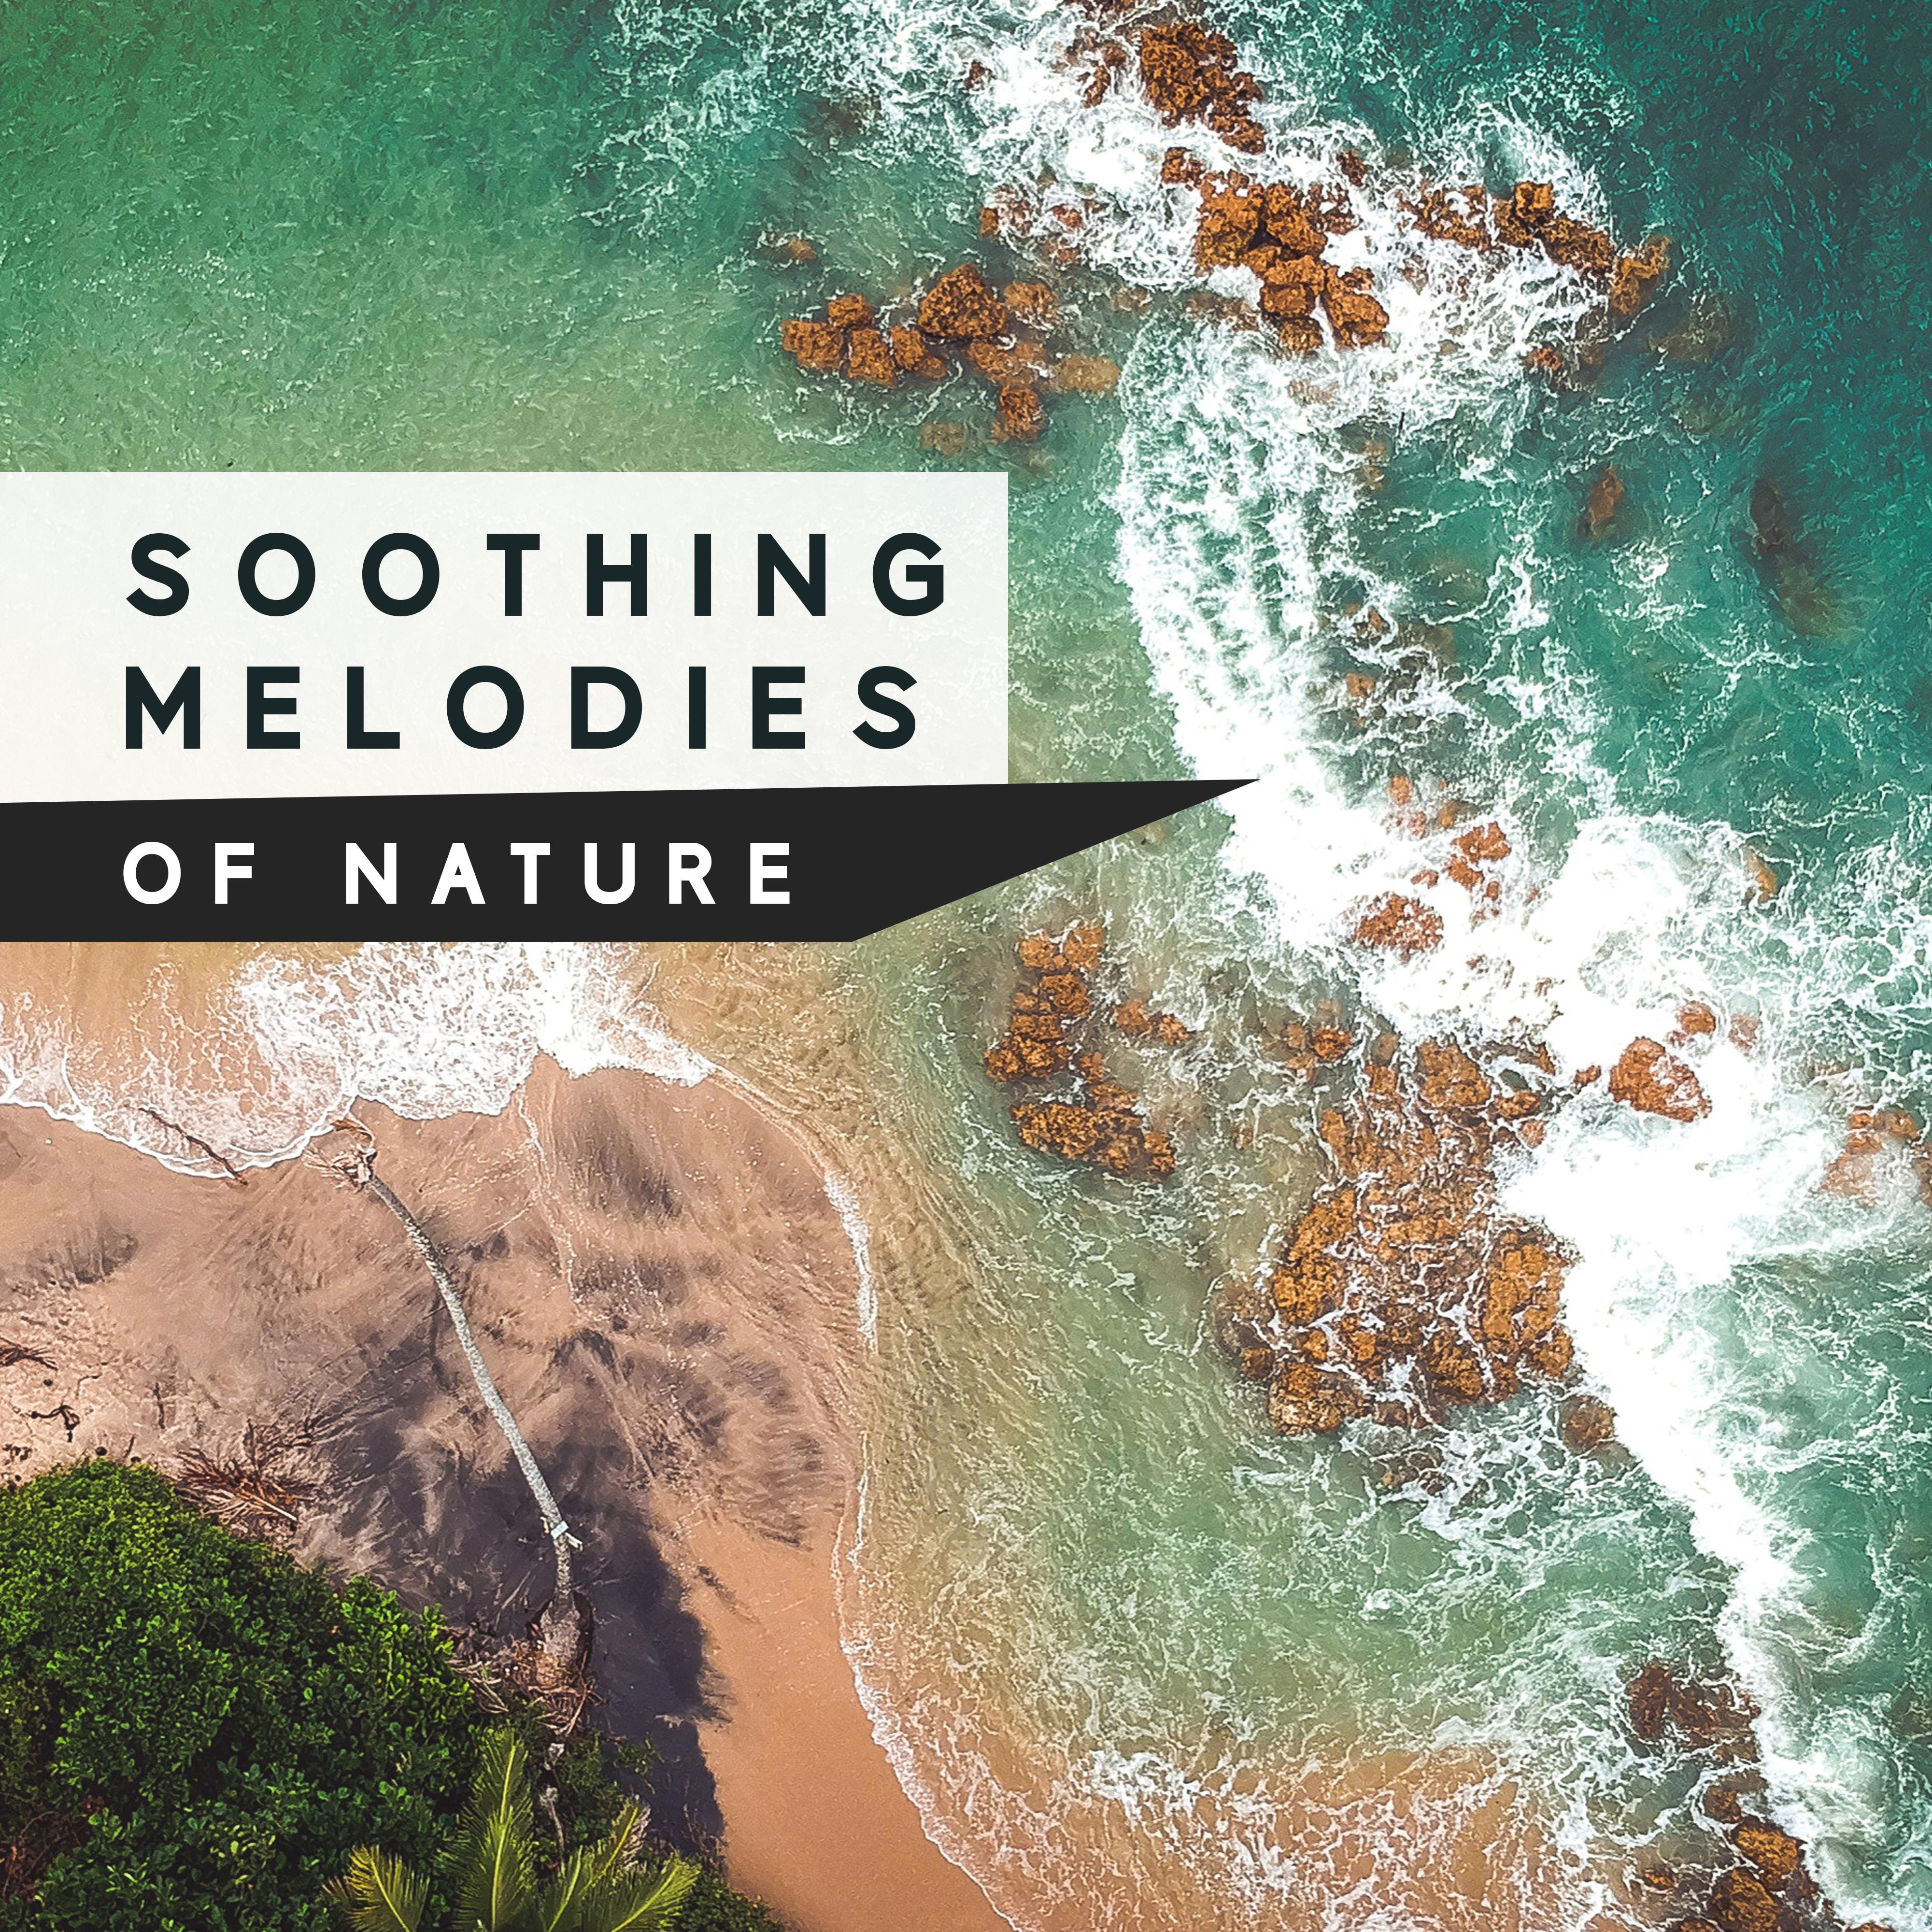 Soothing Melodies of Nature